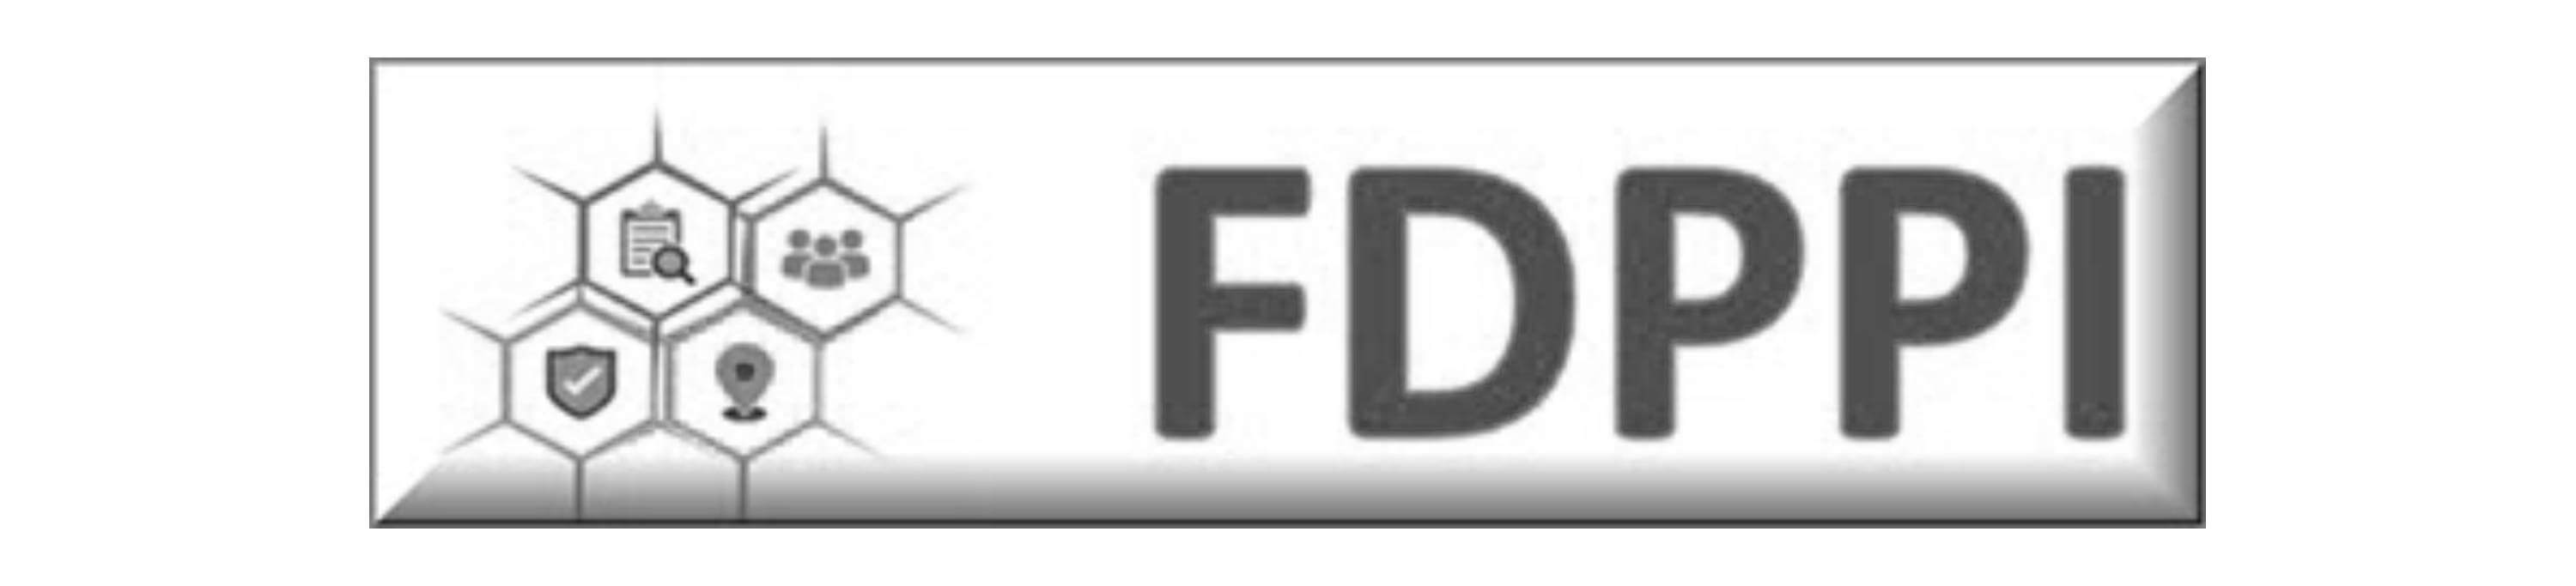 FDPPI as a Federation of Data Protection Consultants